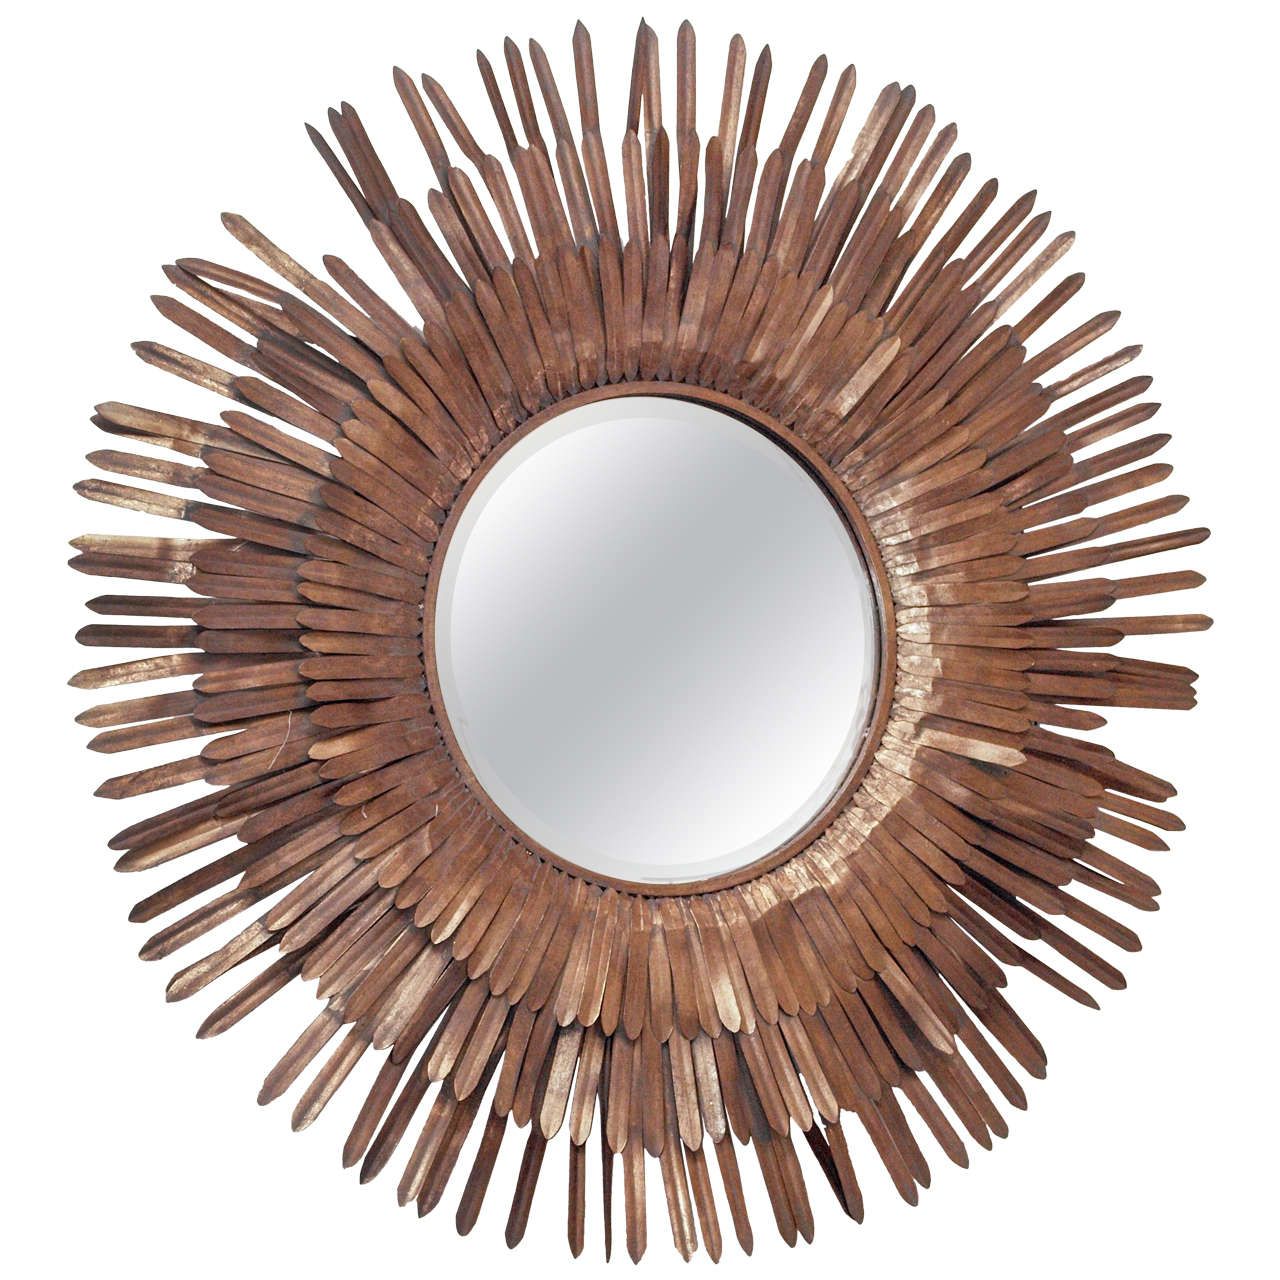 20th Century Italian Sunburst Gilt Metal Beveled Mirror For Sale At 1stdibs Throughout Current Twisted Sunburst Metal Wall Art (View 5 of 20)